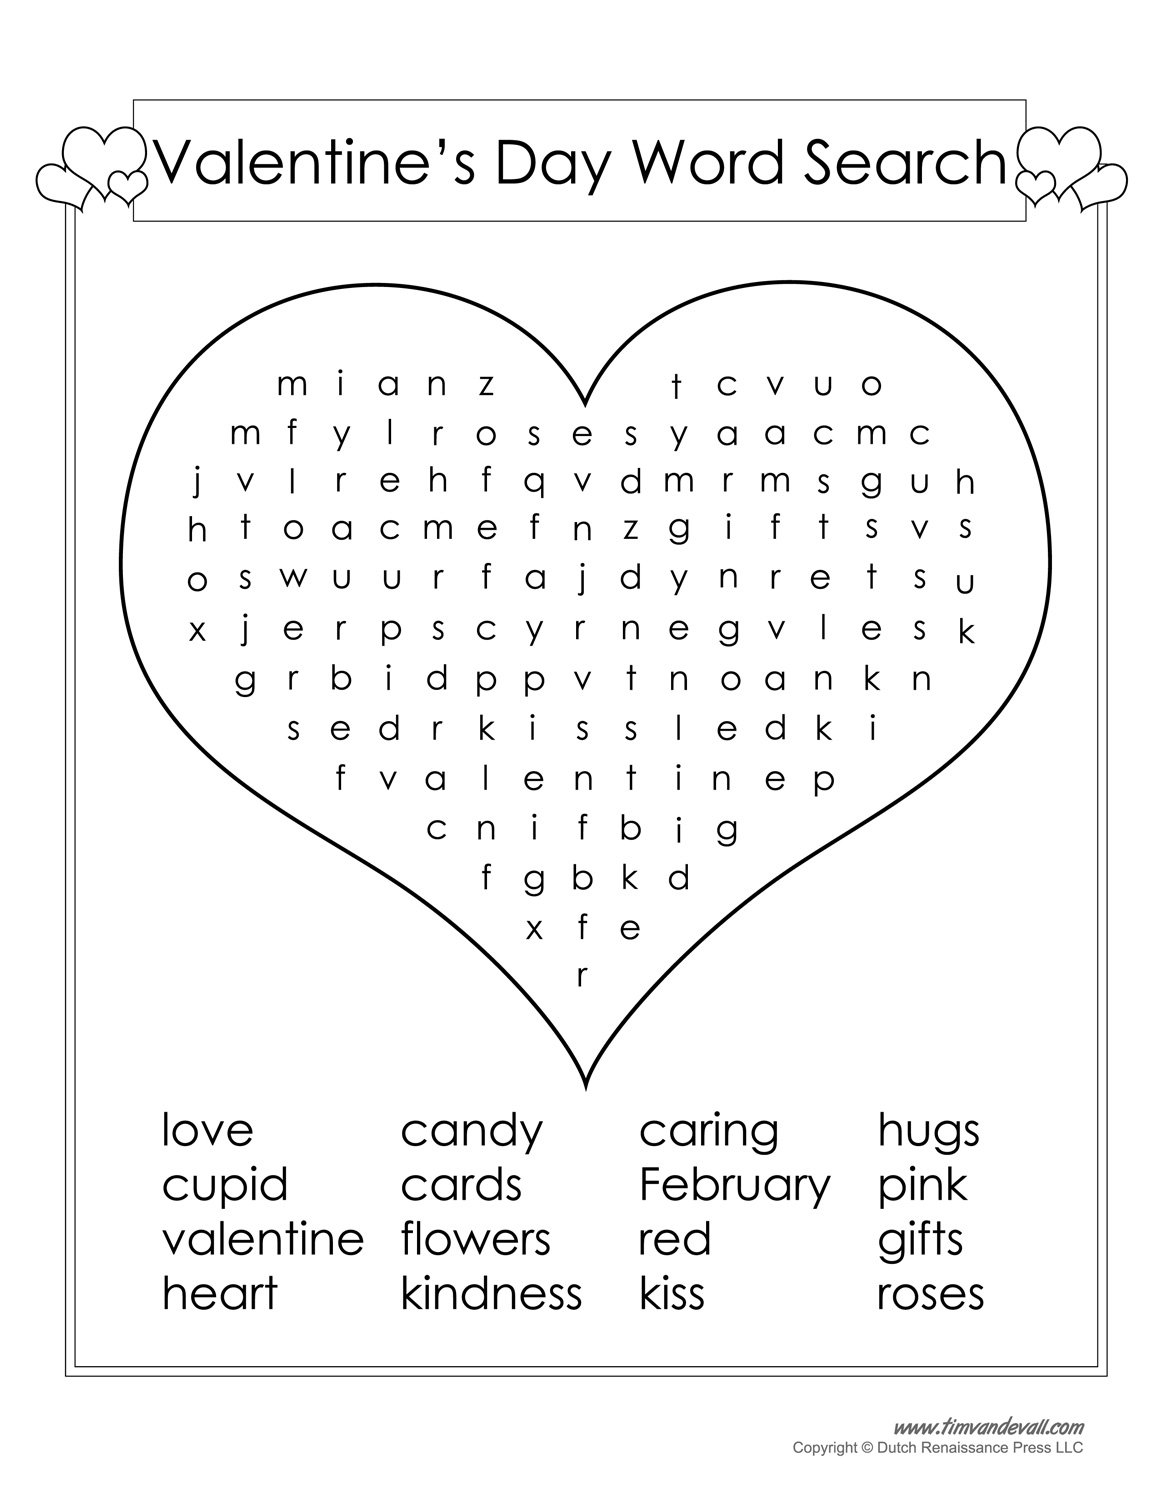 free-valentine-s-day-word-search-printable